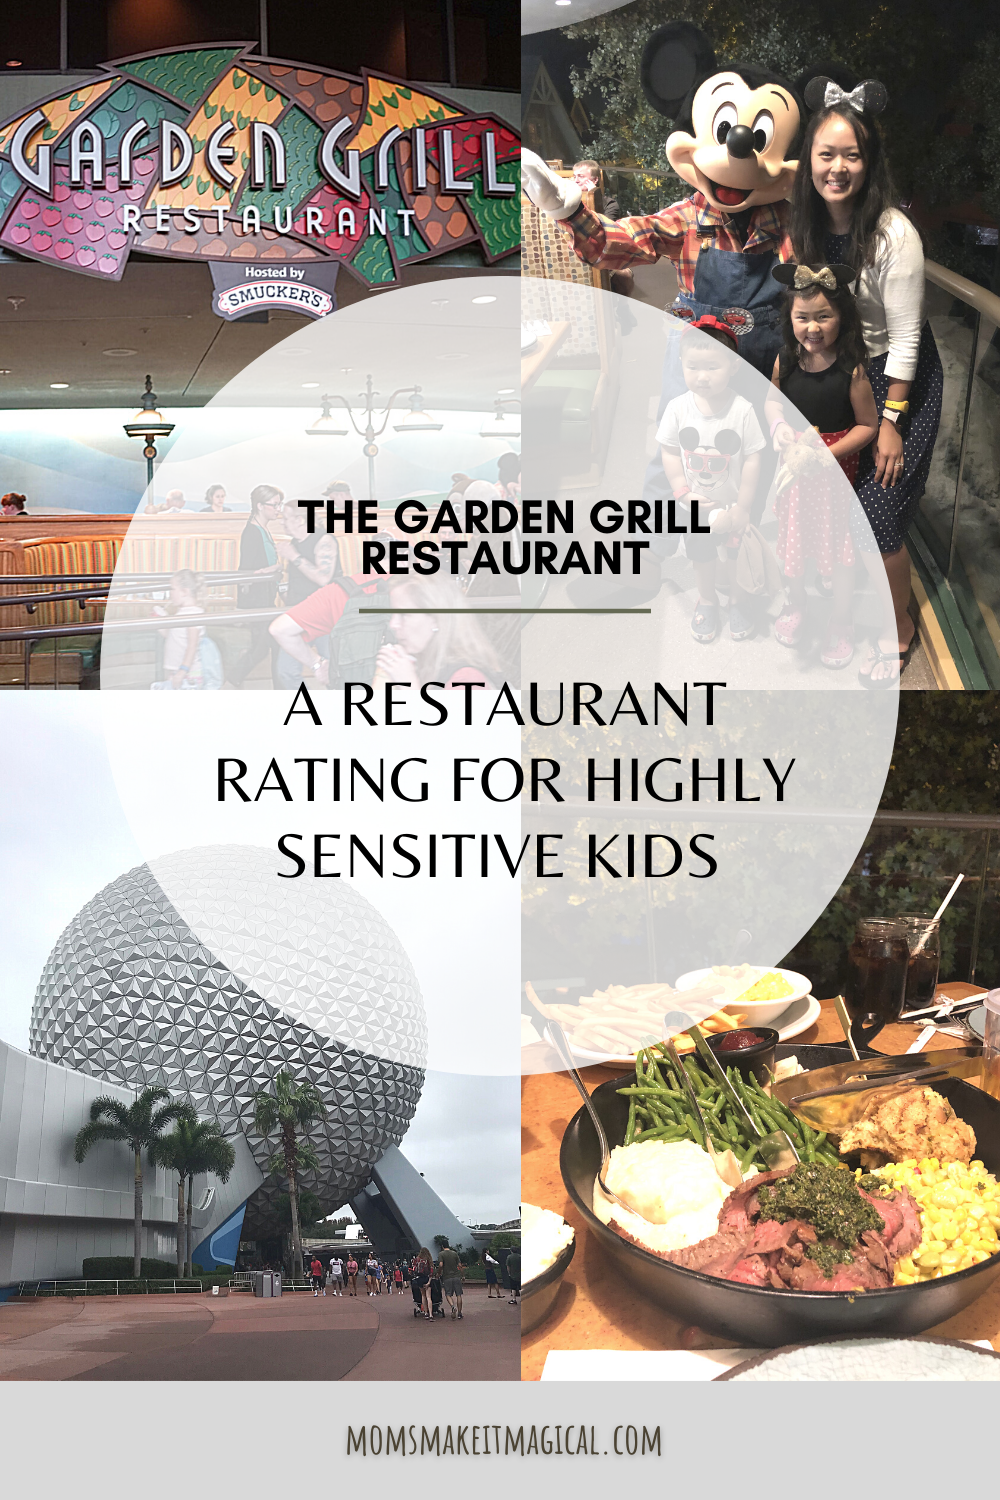 Is Garden Grill Restaurant Scary for Sensitive Kids?